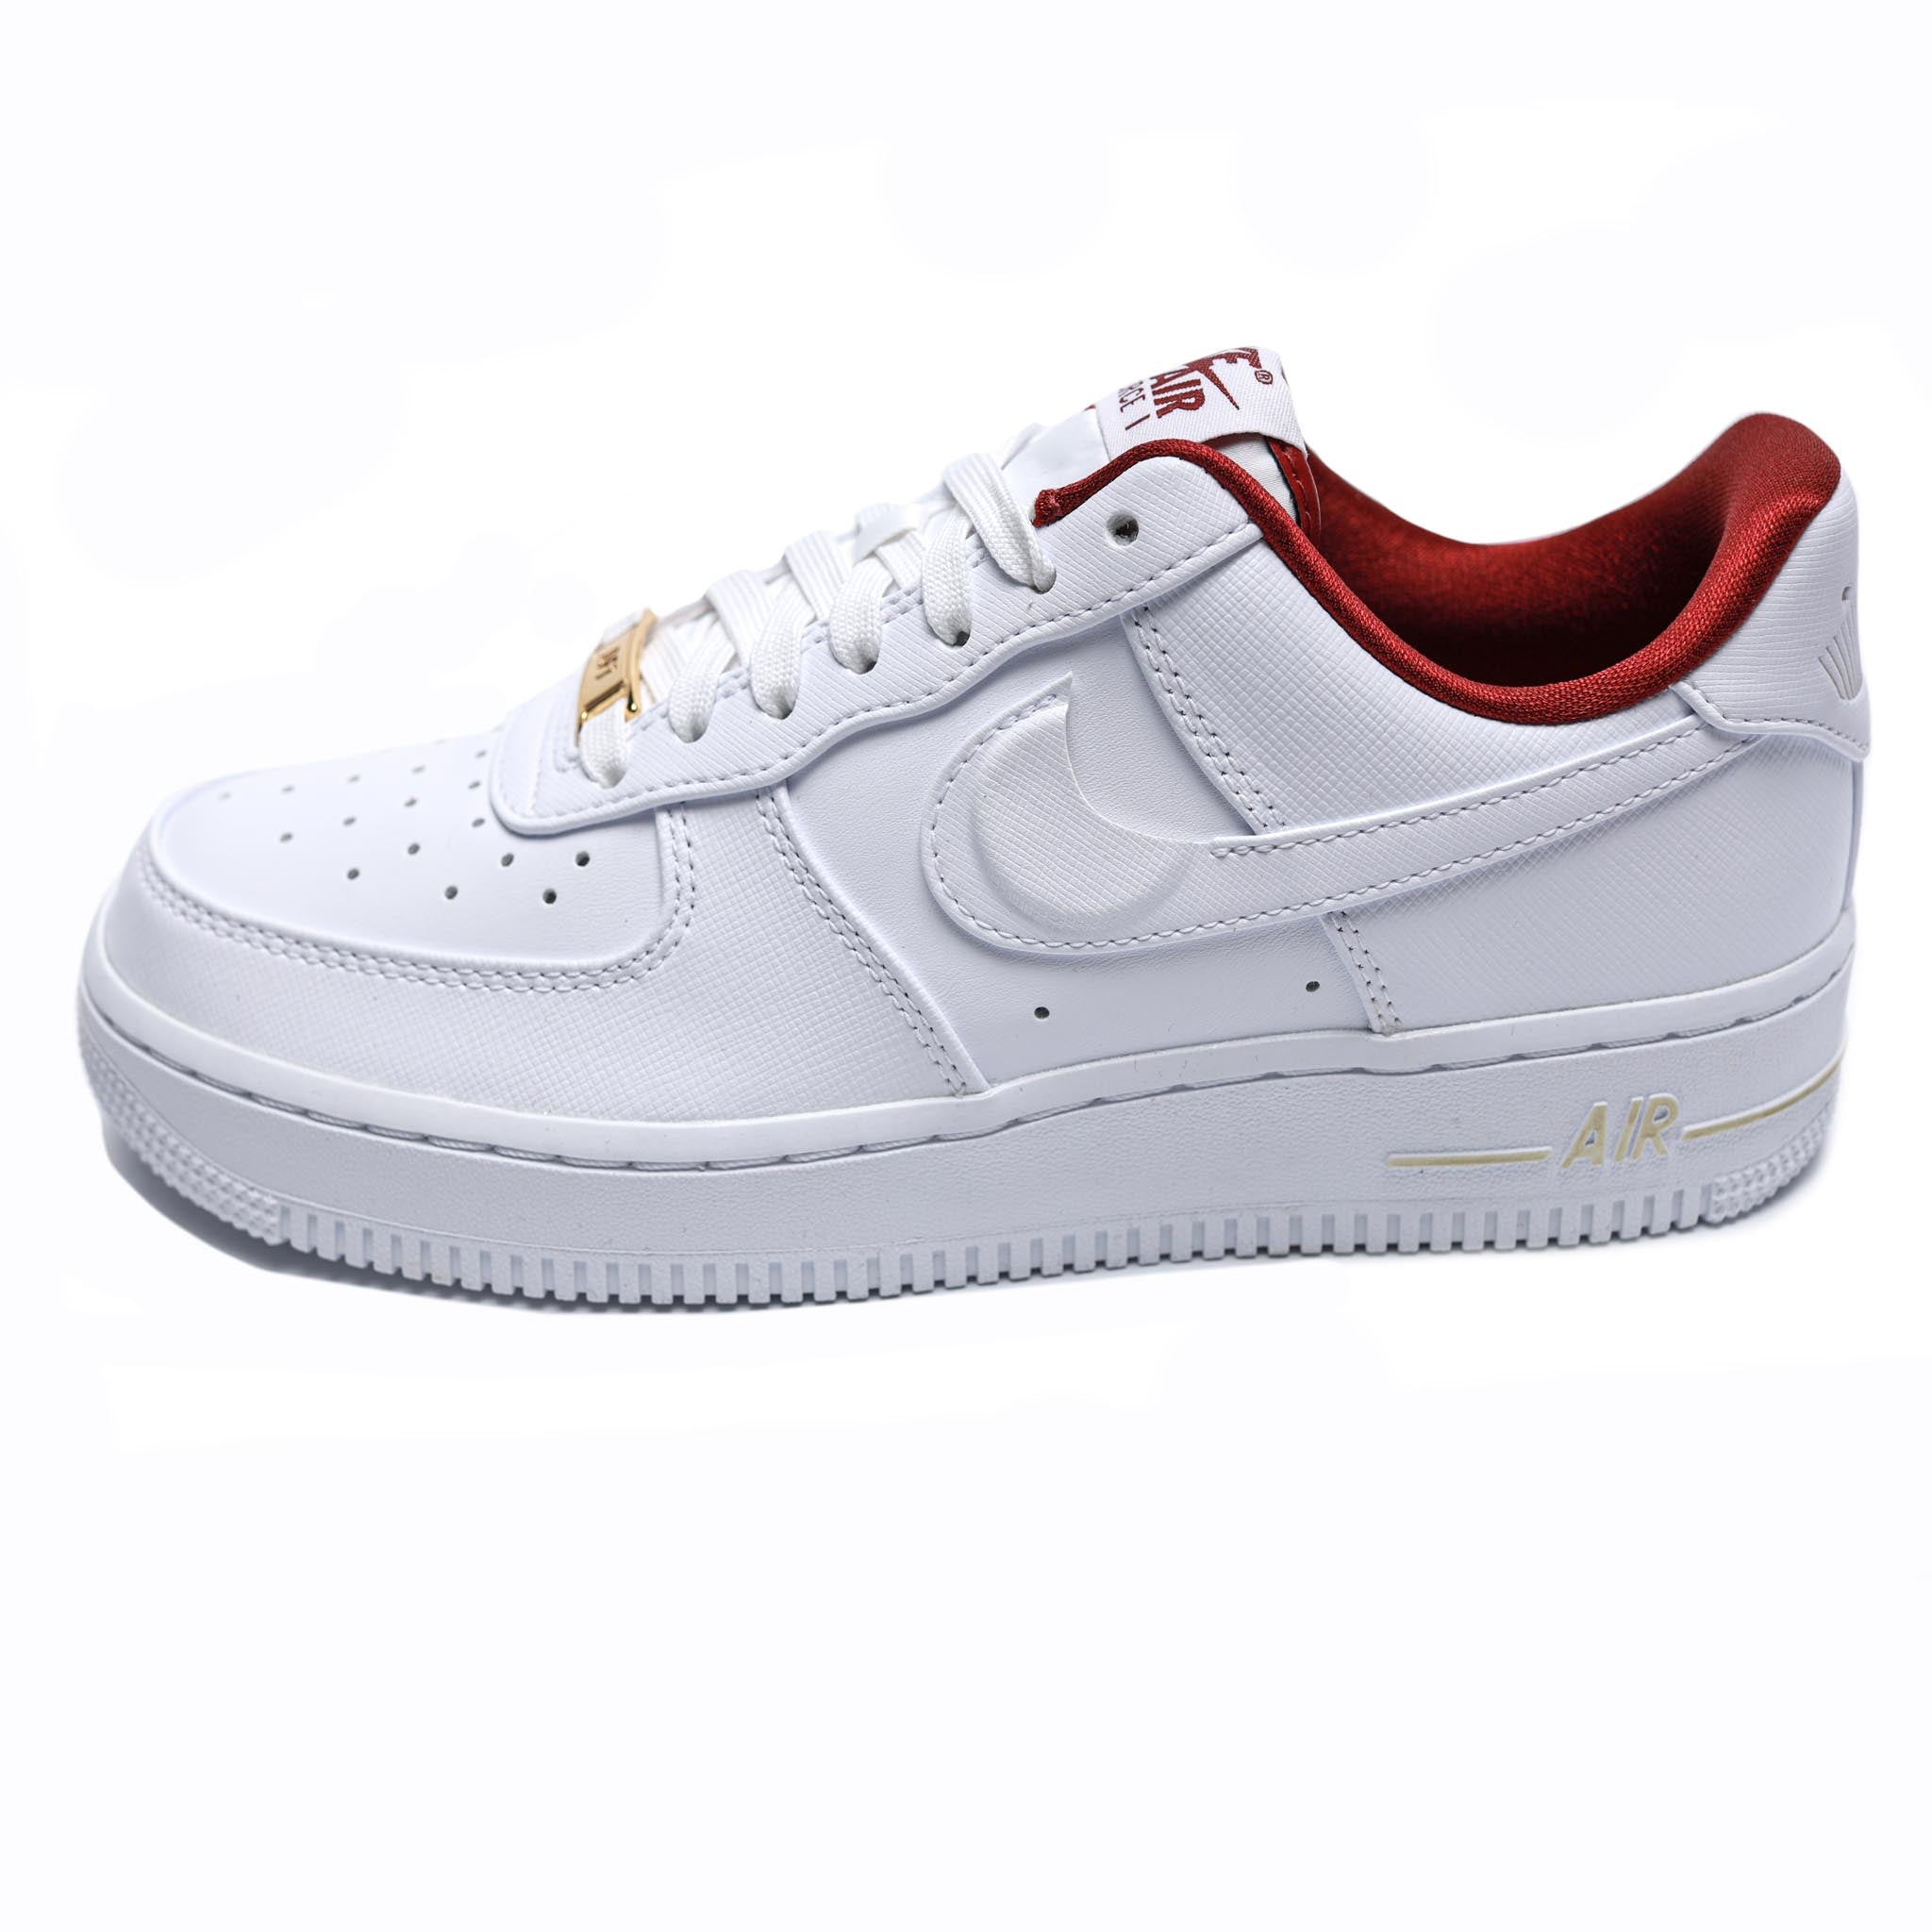 Nike Air Force 1 Low '07 SE 'Just Do It' White/Team Red